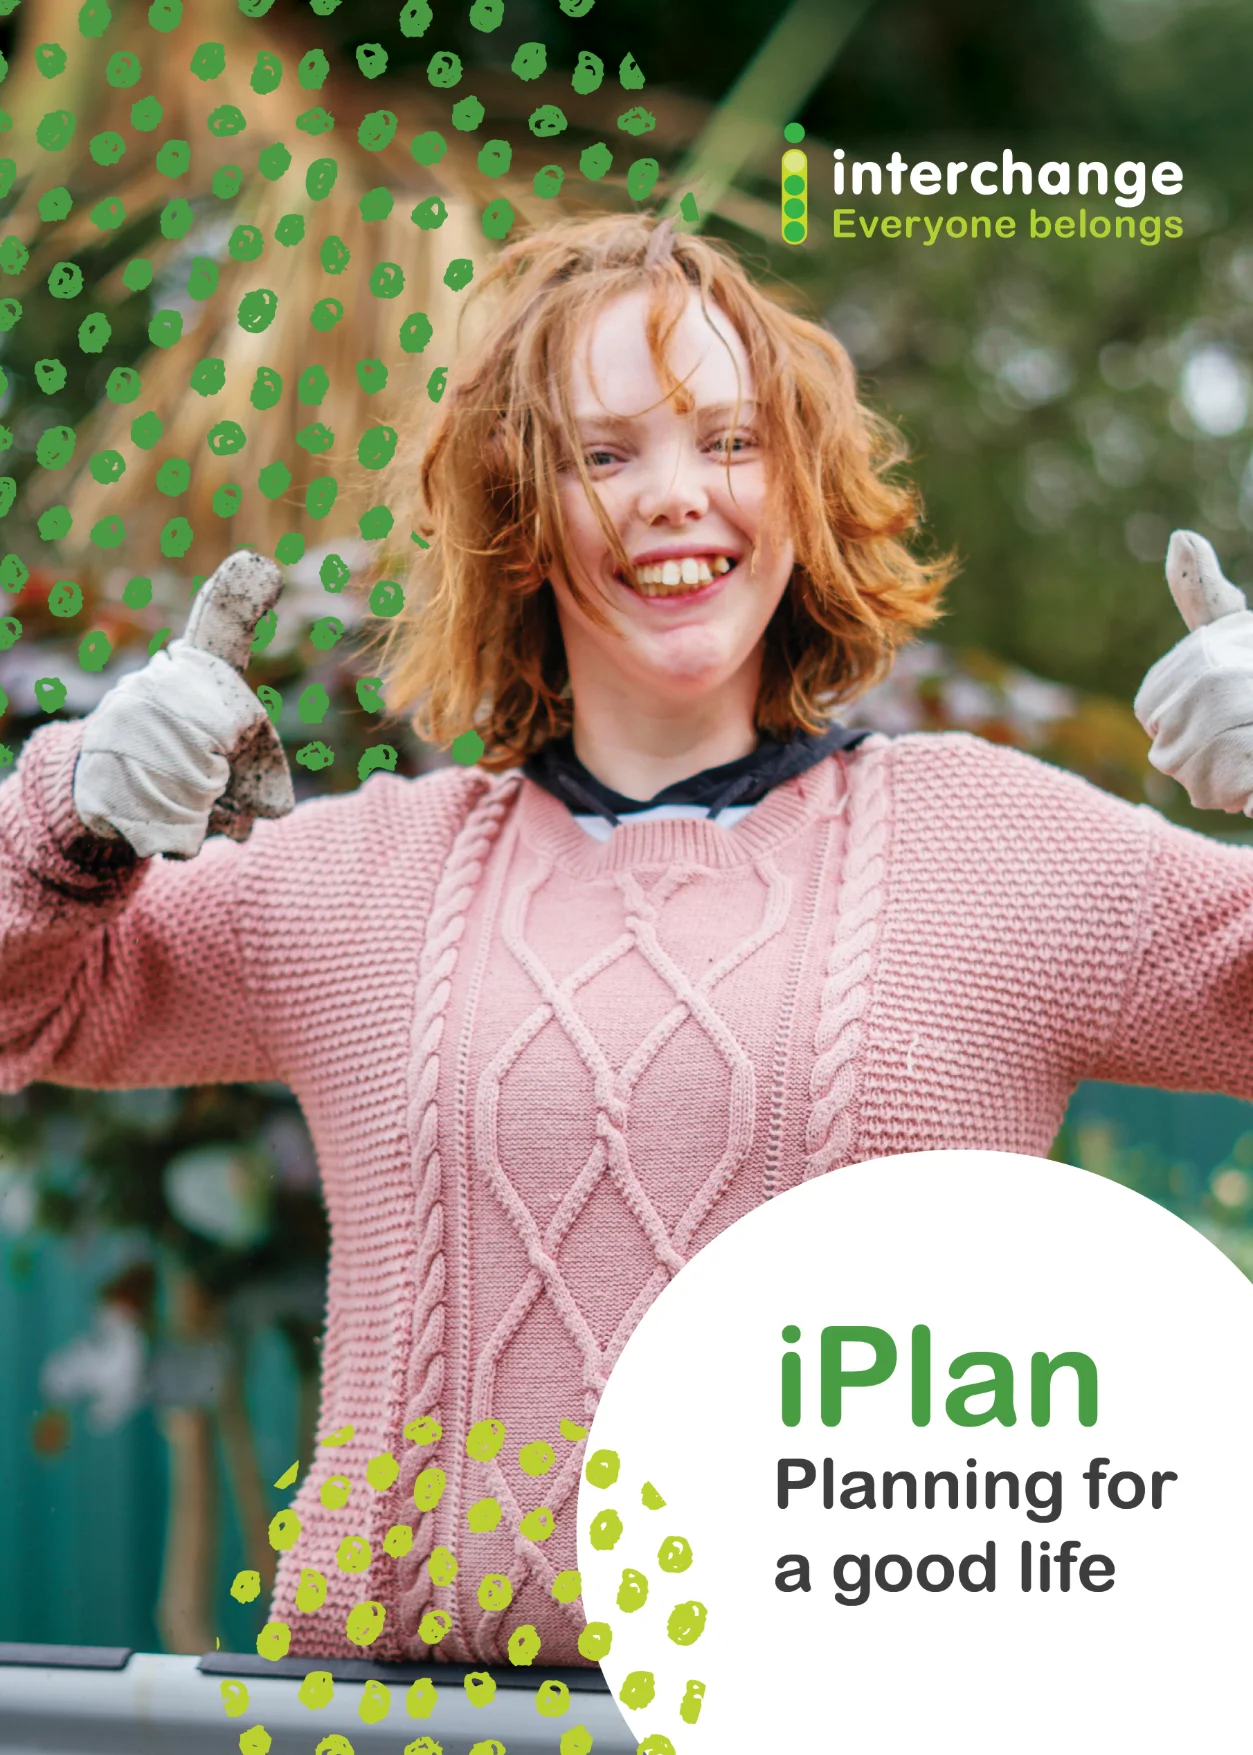 iPlan - Planning for a good life